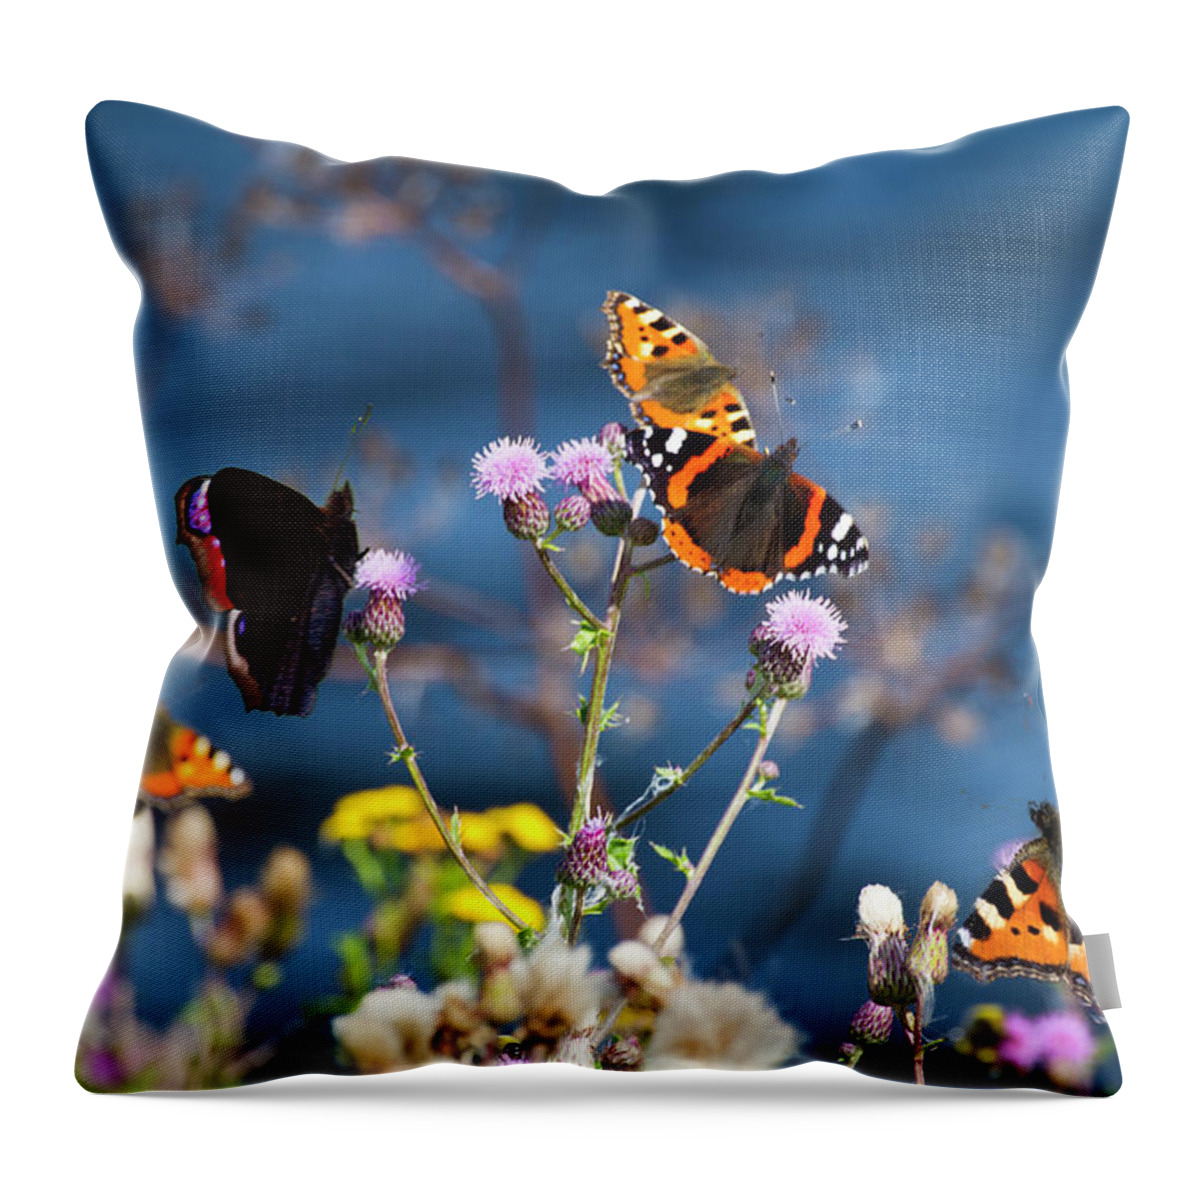 Insect Throw Pillow featuring the photograph Butterflies Sitting On Flower by Www.wm Artphoto.se